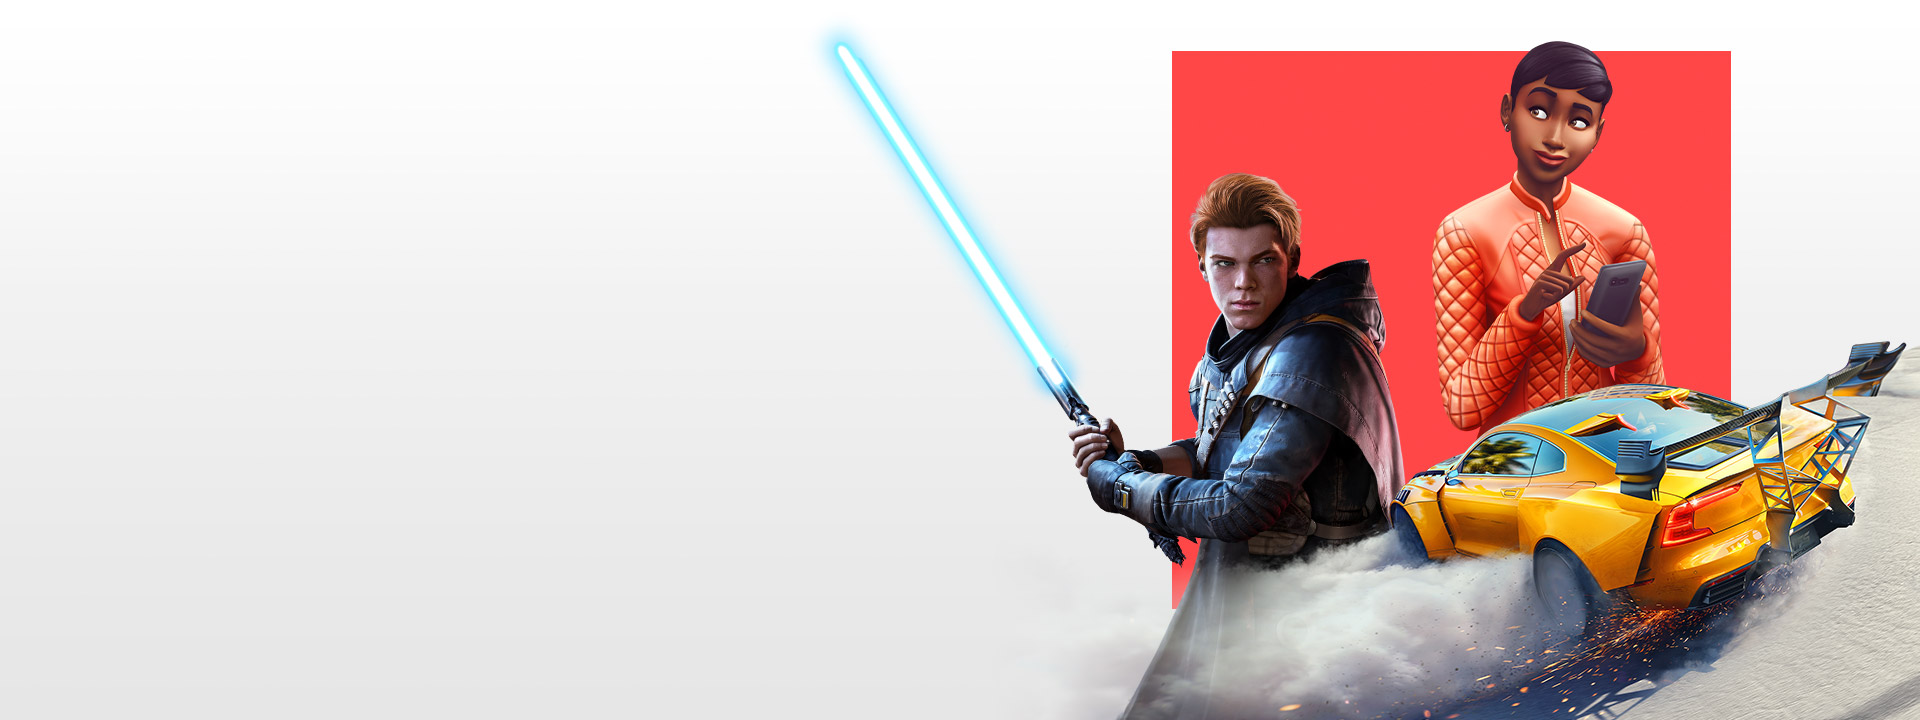 Characters from EA games available with EA Play: Star Wars: Jedi Fallen Order, The Sims 4 and Need for Speed